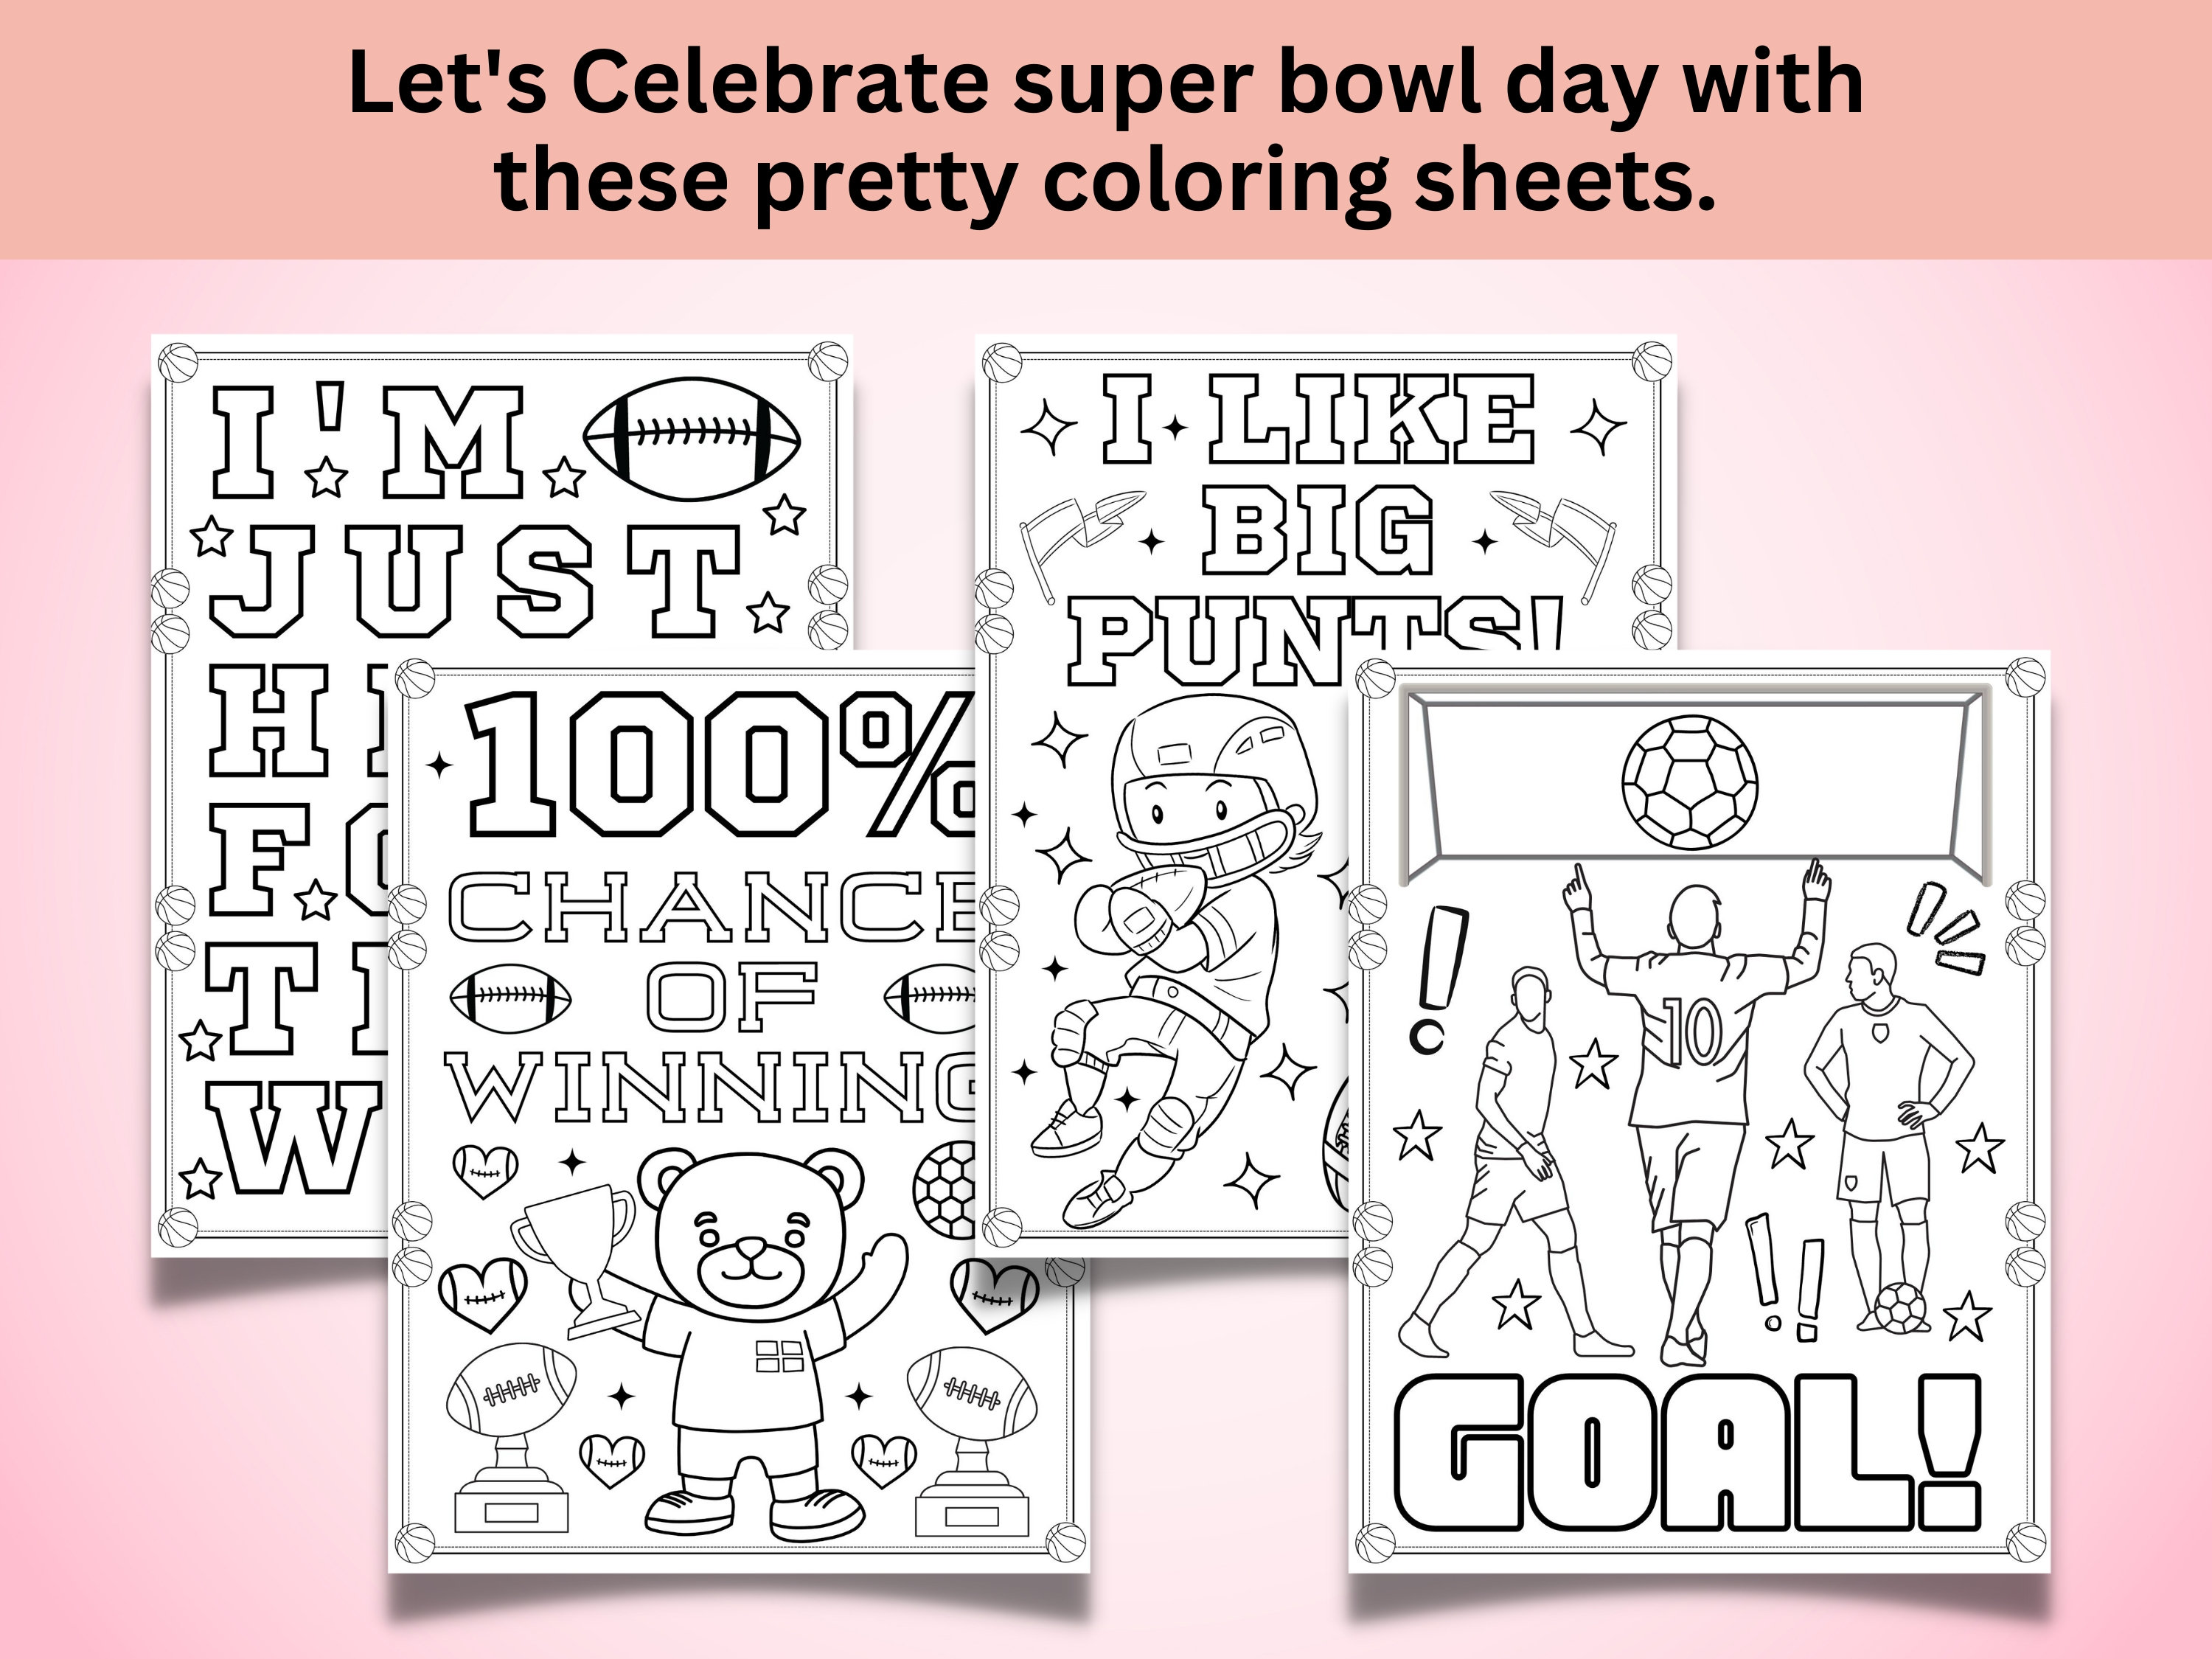 Super bowl coloring pages game day coloring sheets superbowl day coloring book for kids sport coloring activity